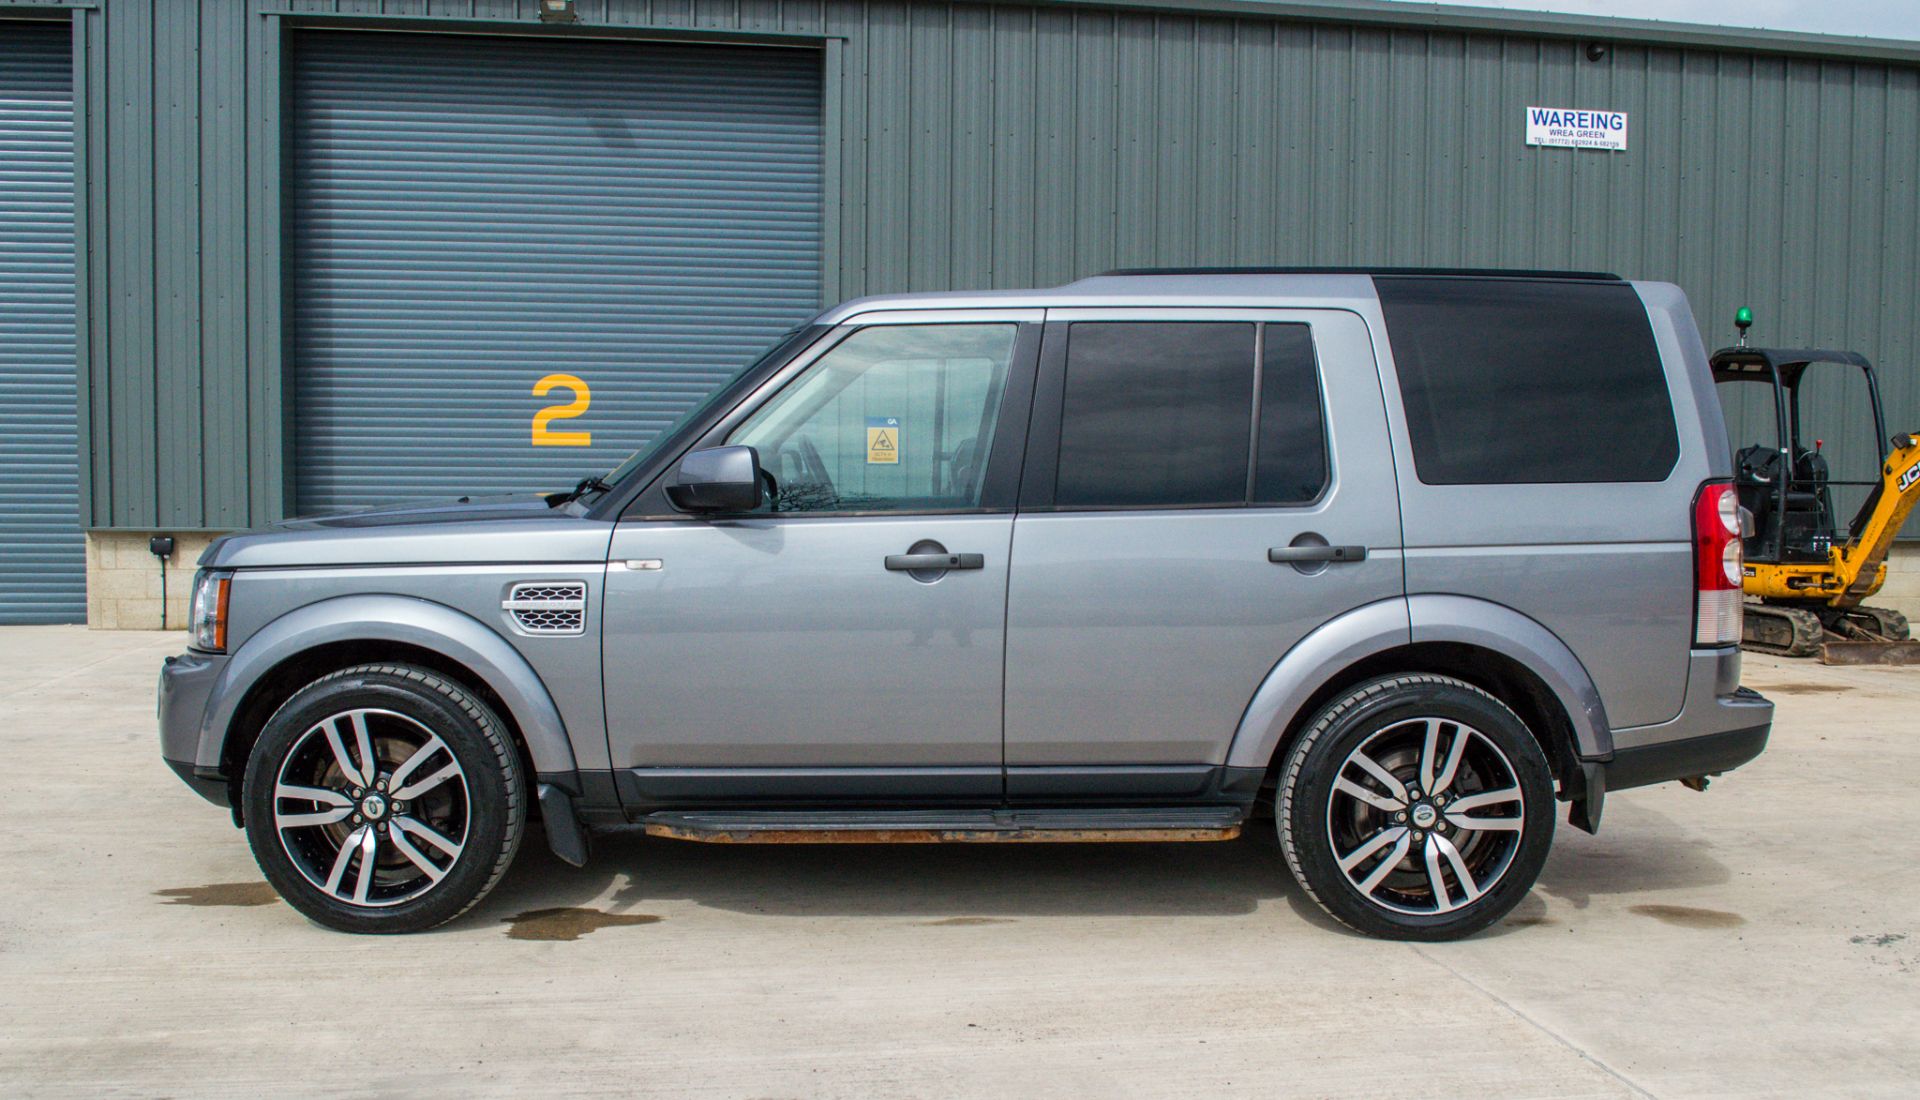 Land Rover Discovery 4 HSE SDV6 3.0 diesel automatic estate car - Image 7 of 32